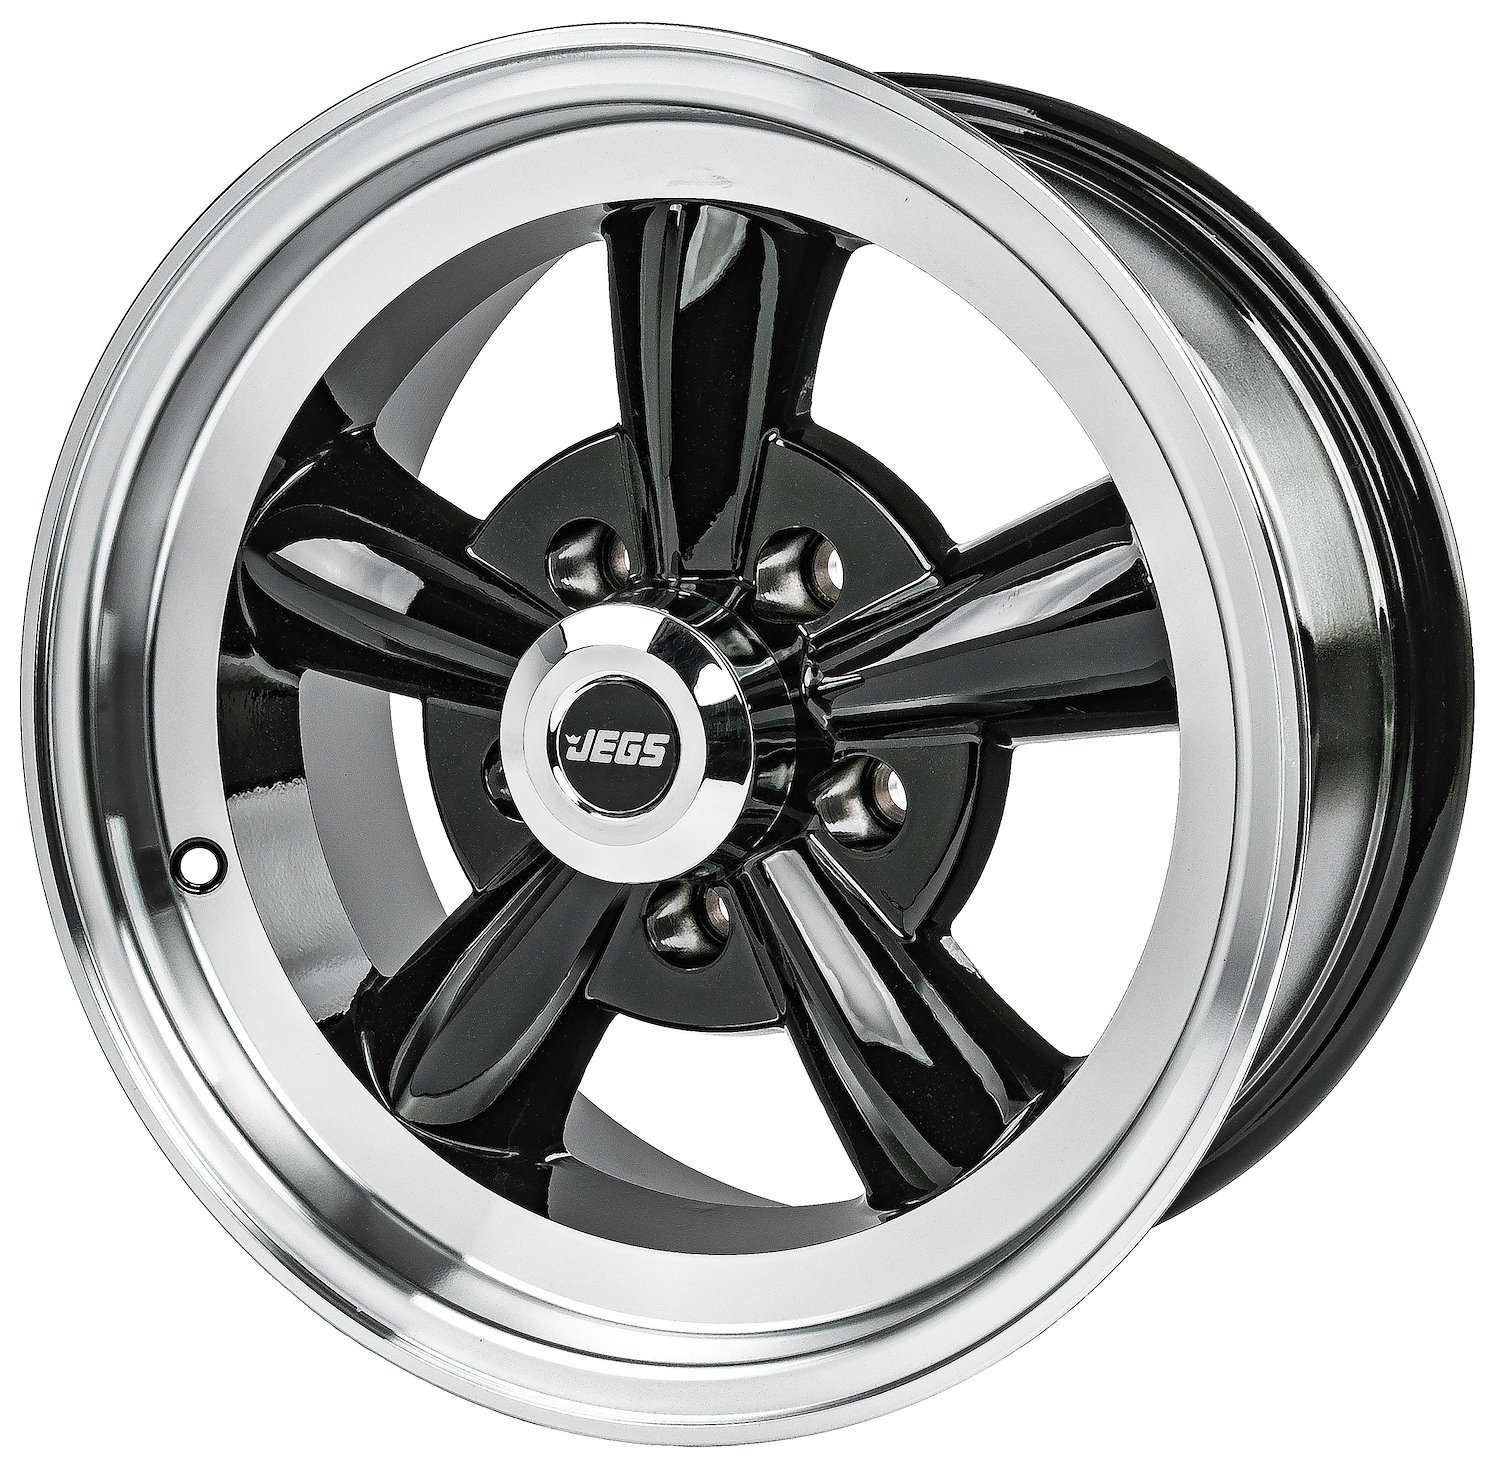 JEGS 555-670104 Sport Torque Wheel [Size: 15" x 7"] Polished Lip with Black  Spokes - JEGS